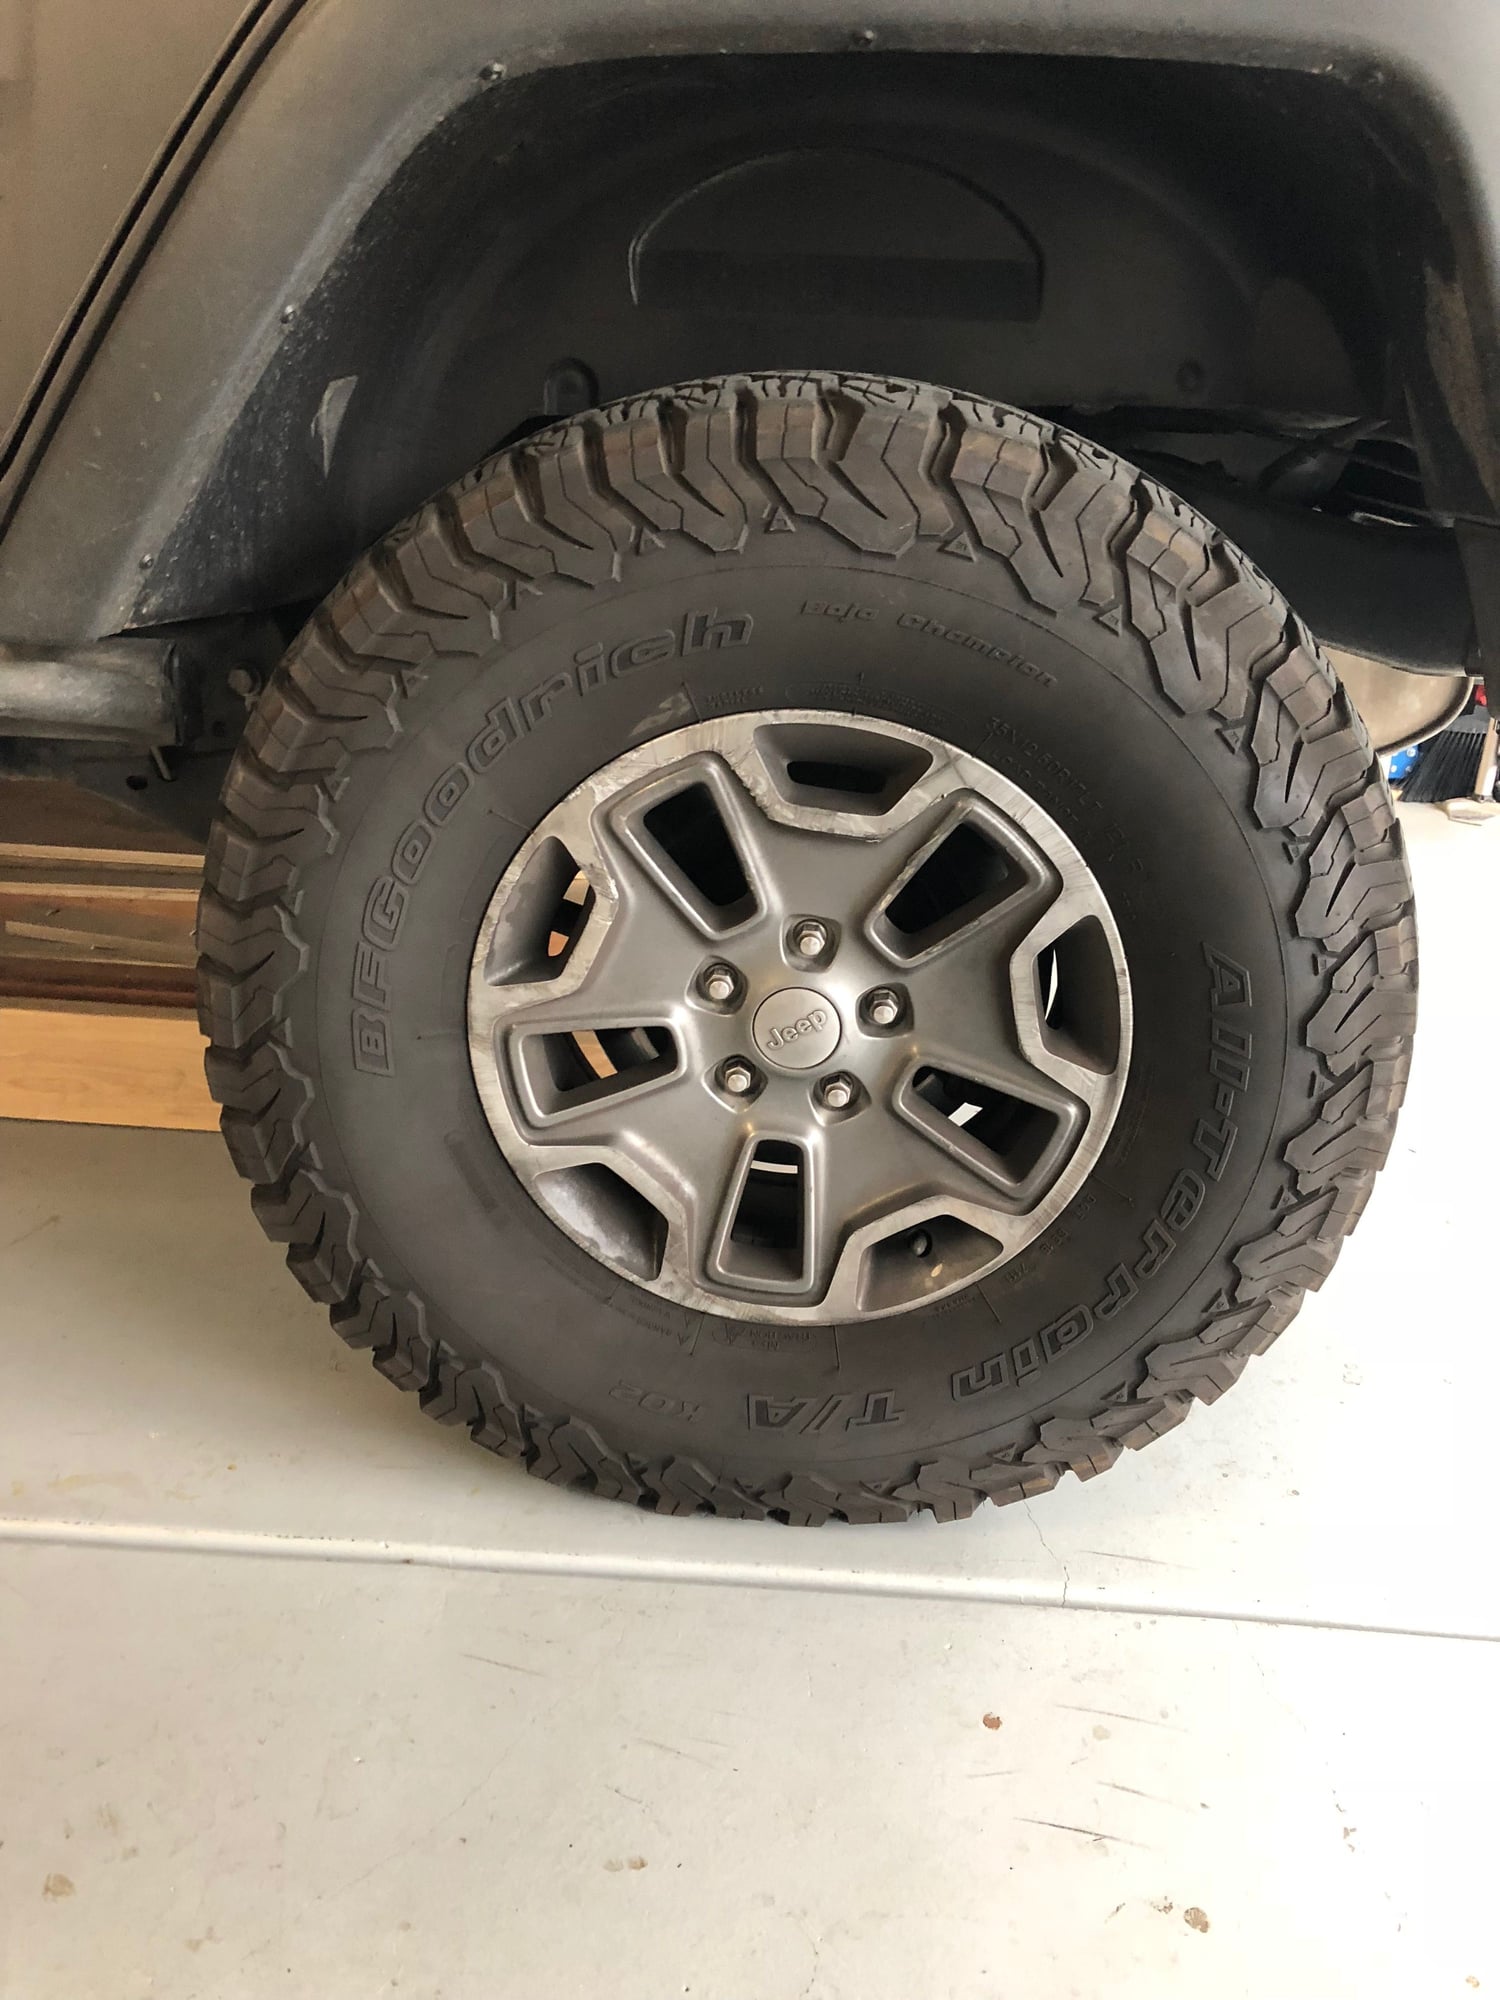 Wheels and Tires/Axles - FS: 5x BFG AT KO2 All Terrain Tires 35x12.5r17 - Socal - $1000 - Used - All Years Jeep Wrangler - Los Angeles, CA 90066, United States